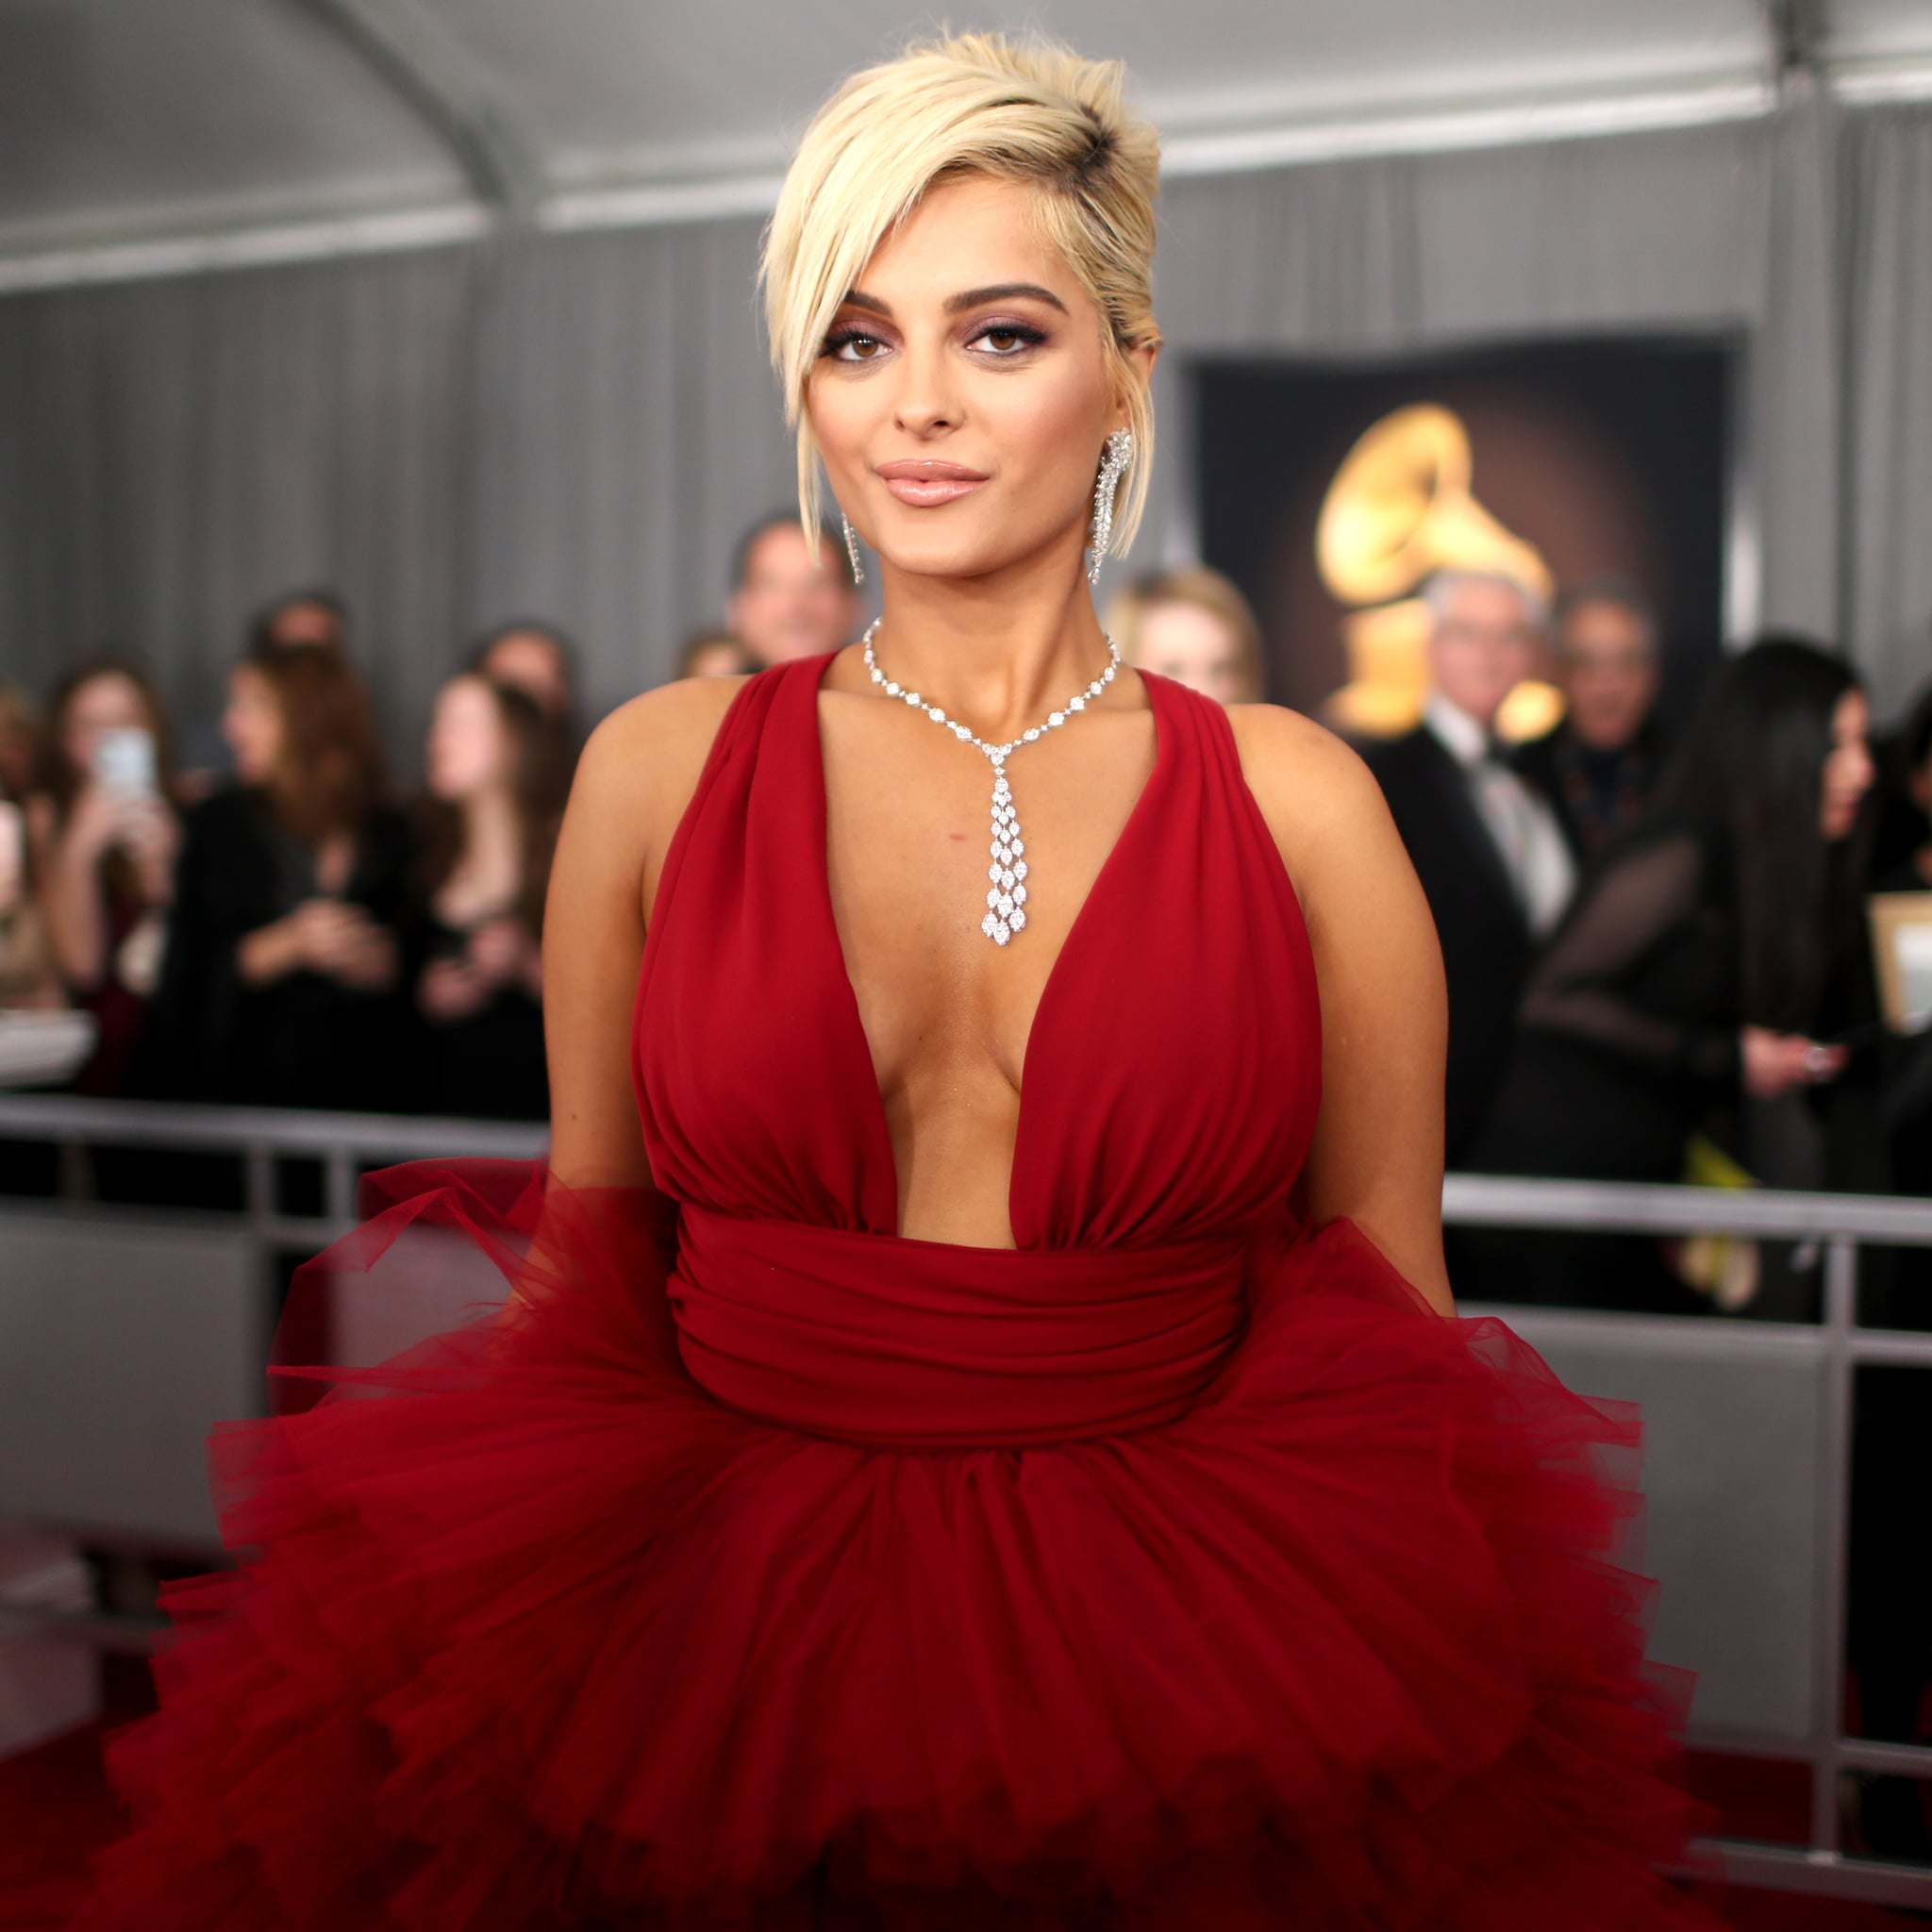 LOS ANGELES, CA - FEBRUARY 10:  Bebe Rexha attends the 61st Annual GRAMMY Awards at Staples Centre on February 10, 2019 in Los Angeles, California.  (Photo by Rich Fury/Getty Images for The Recording Academy)